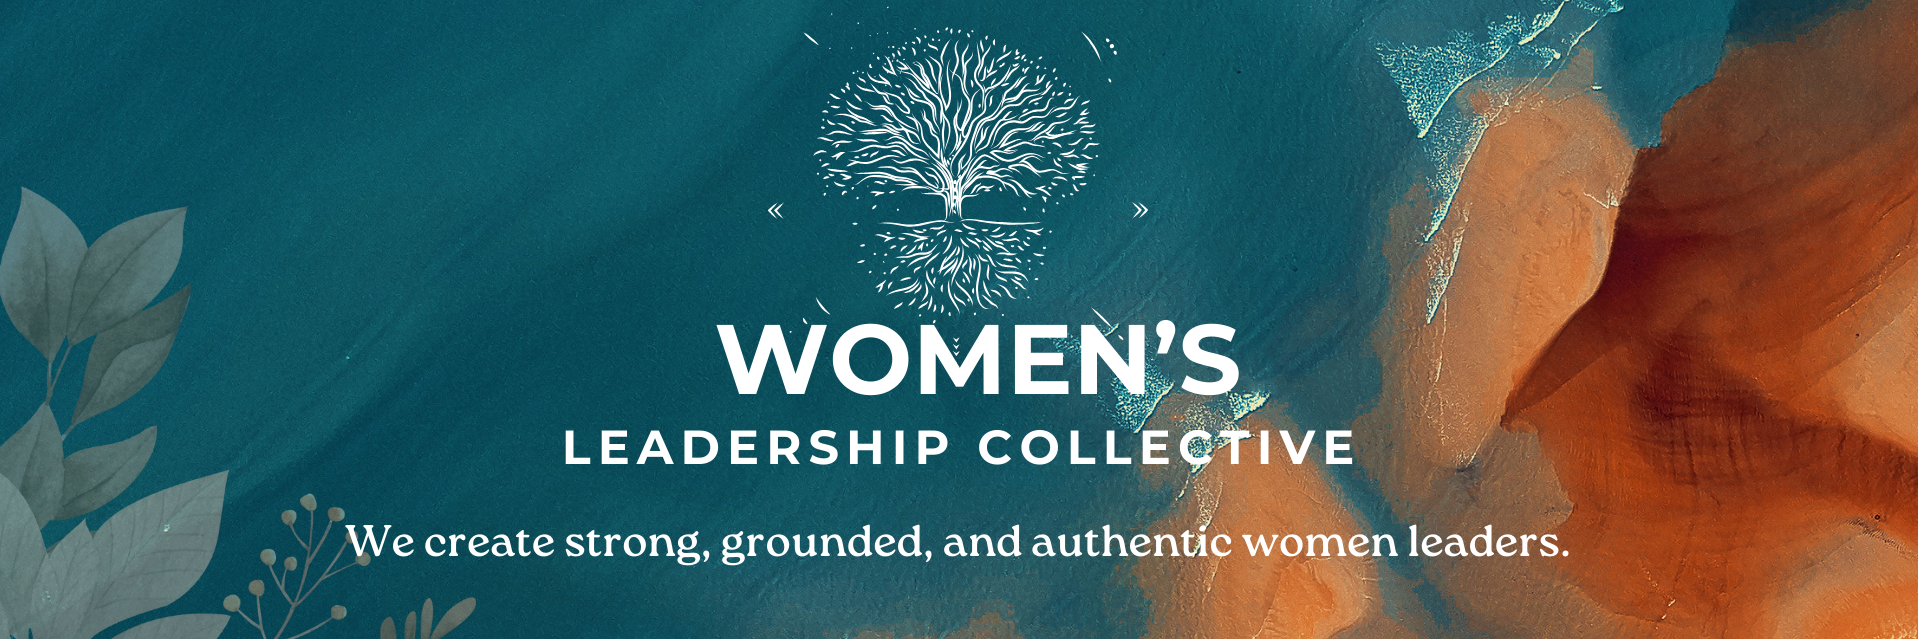 Womens Leadership collective banner 